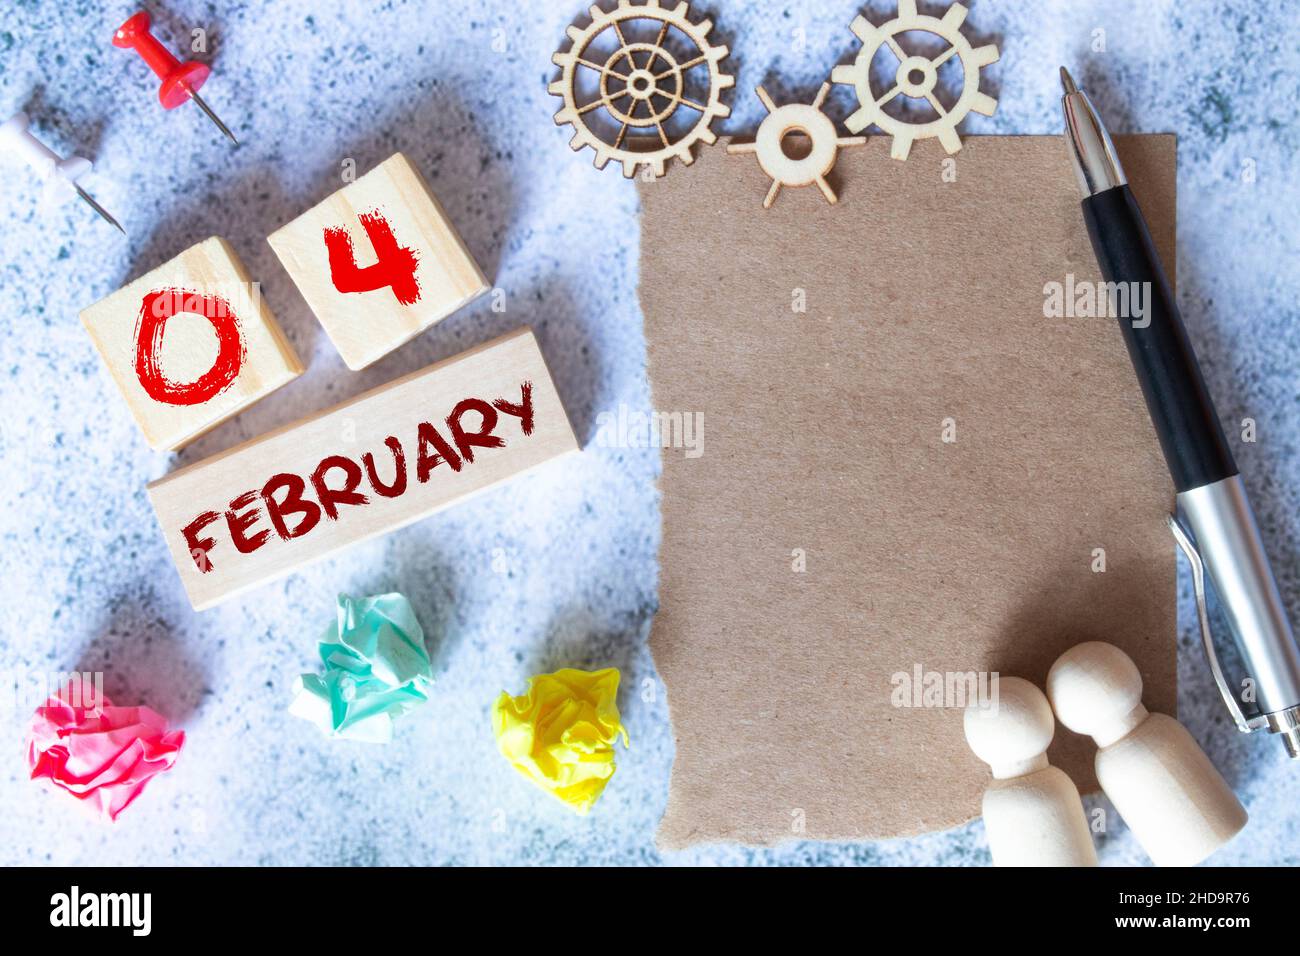 February 4, Cover natural Calendar, Appointment Date design Stock Photo